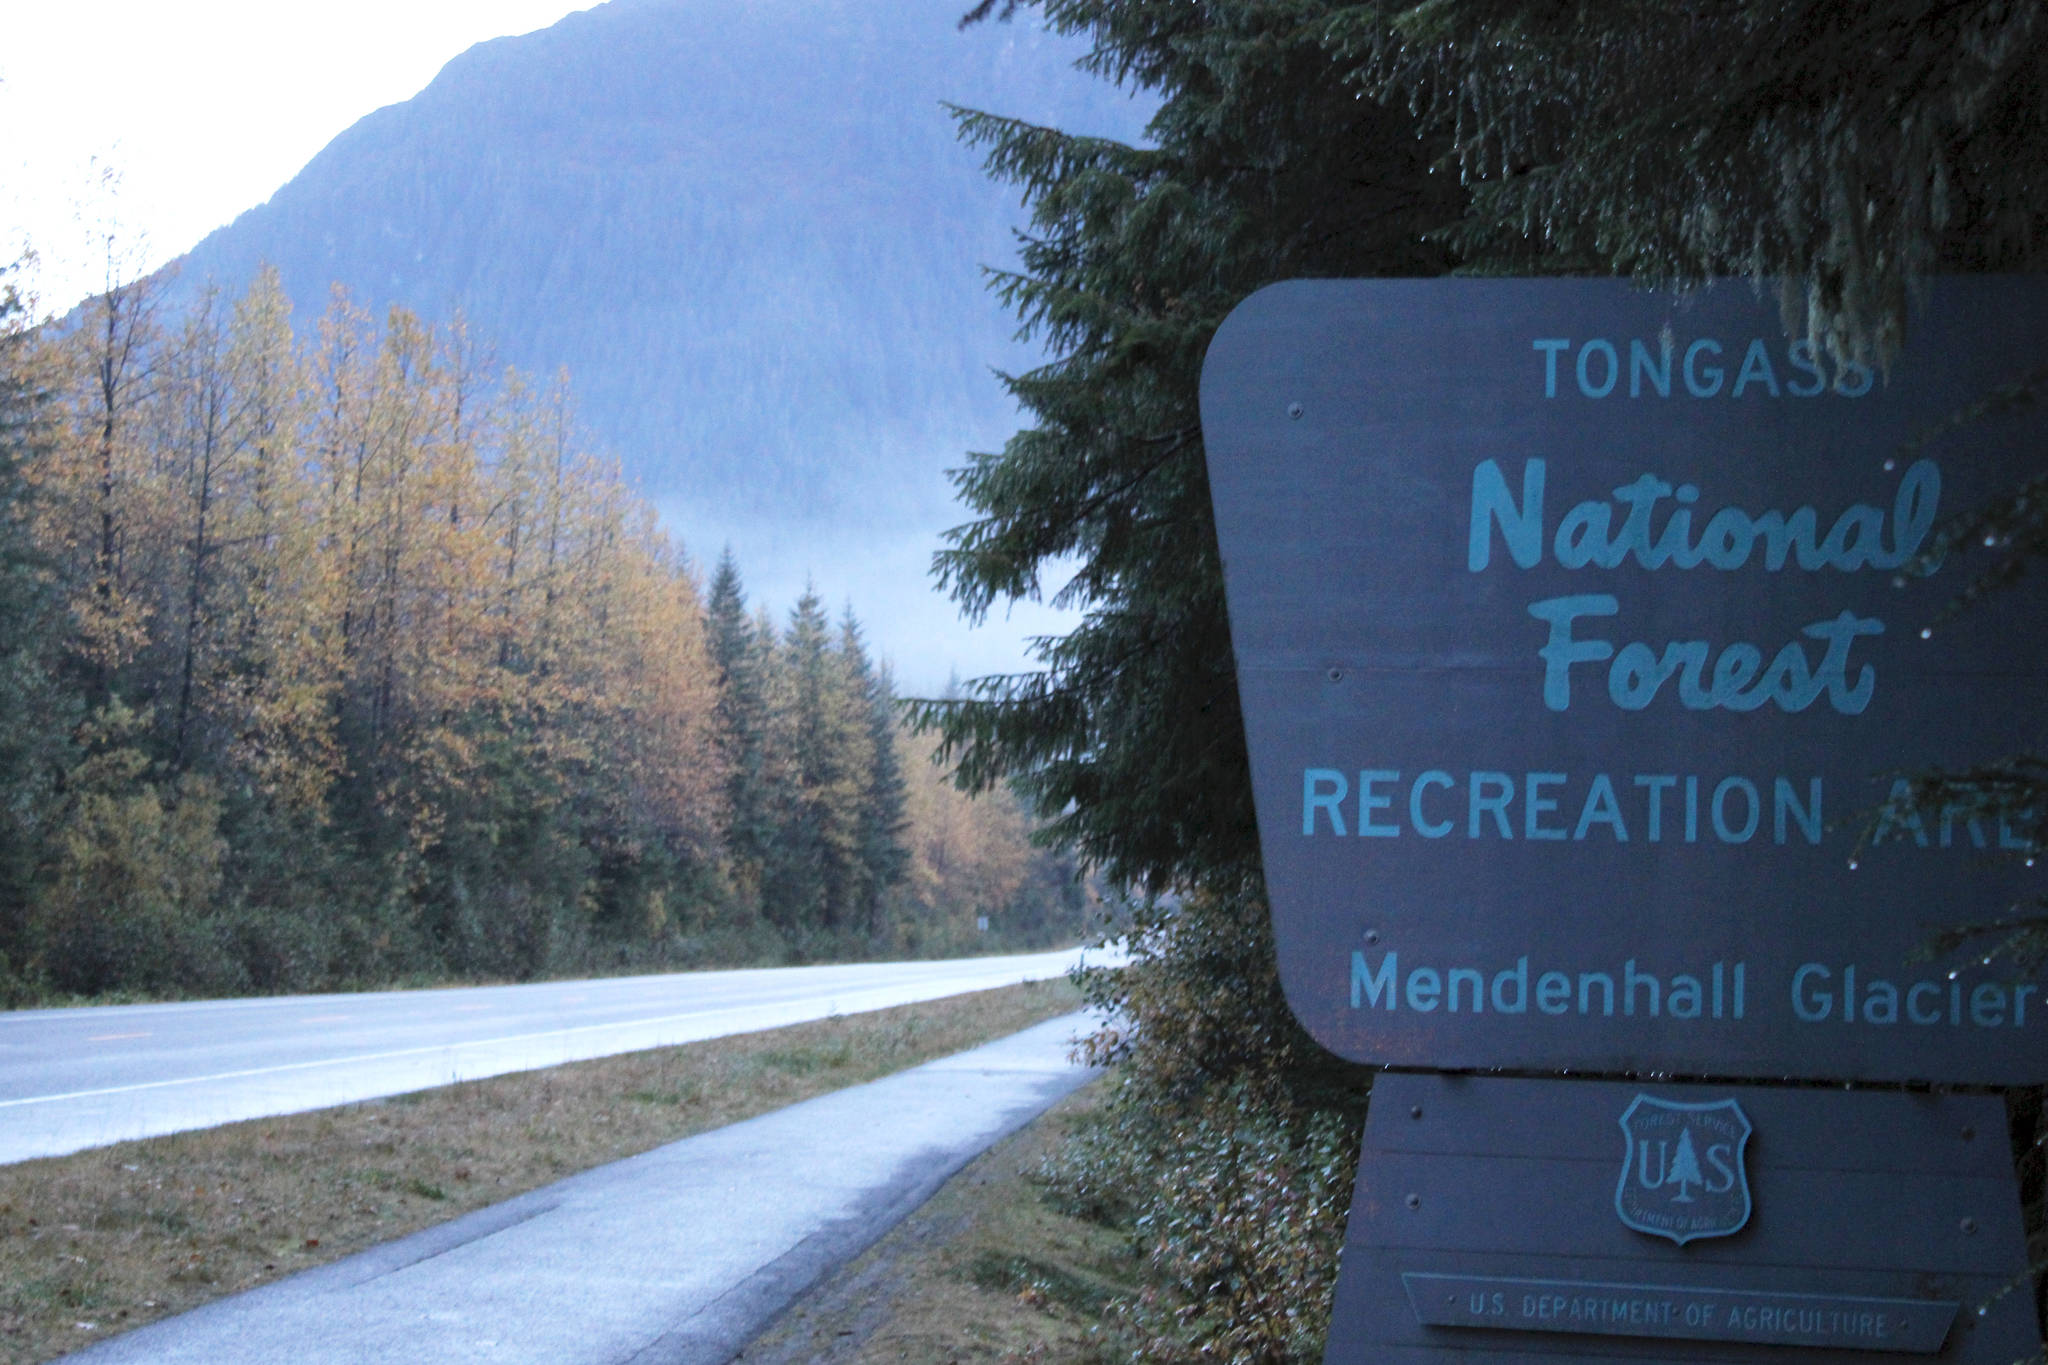 Ben Hohenstatt / Juneau Empire                                This photo shows the entrance to the Mendenhall Glacier Recreation Area, part of the Tongass National Forest on Friday. The U.S. Department of Agriculture recently announced it plans to exempt the forest from the national Roadless Rule, which will make development in the region easier. Proponents say the rule change will make it easier for responsible resource development while critics say it removes essential protections on critical environments.